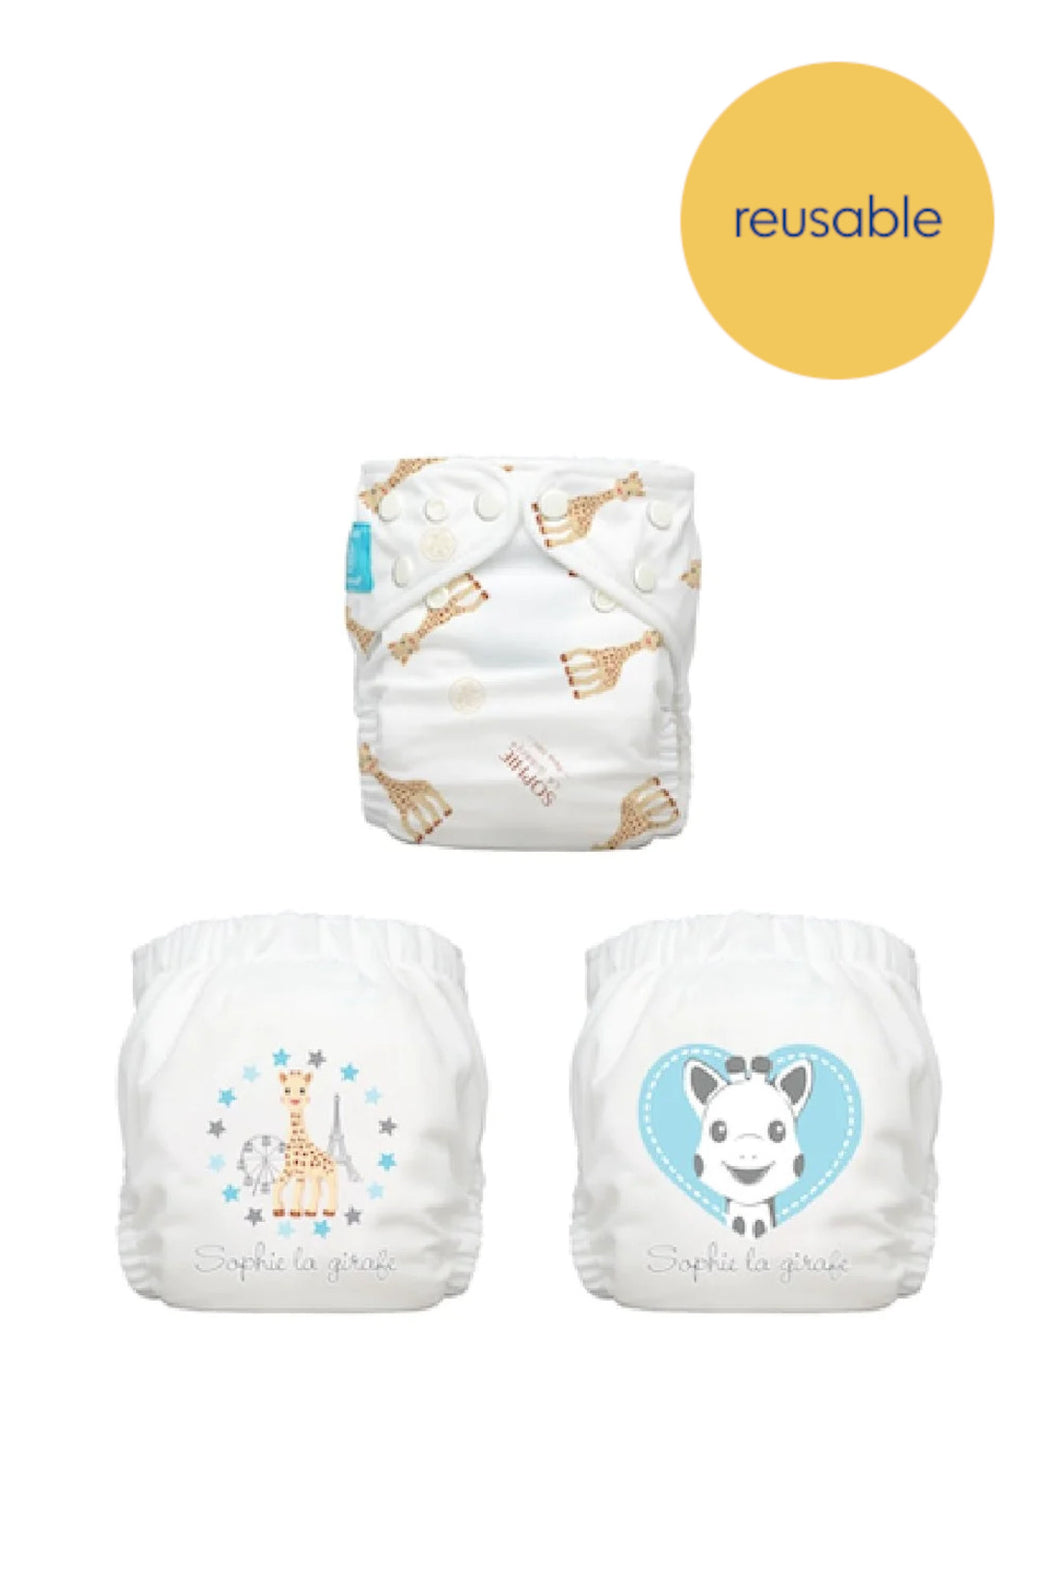 Charlie Banana 3 Reusable Cloth Diapers: One-Size with Fleece - Classic Sophie La Girafe